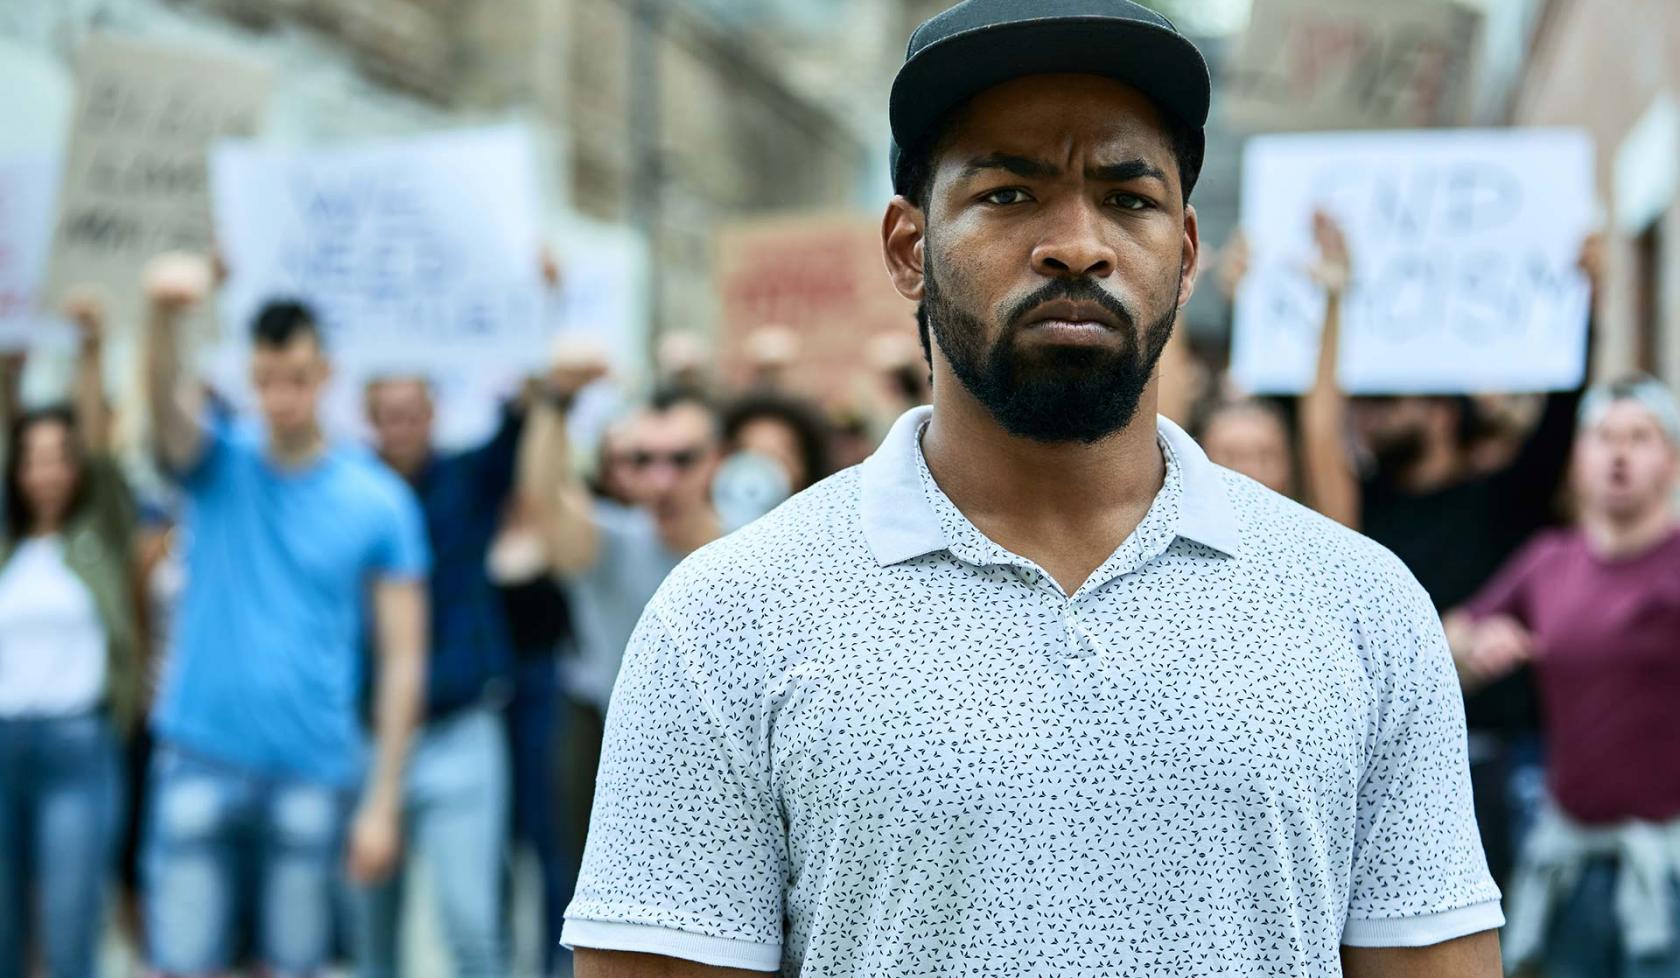 Black Man Standing in Solidarity with Protesters